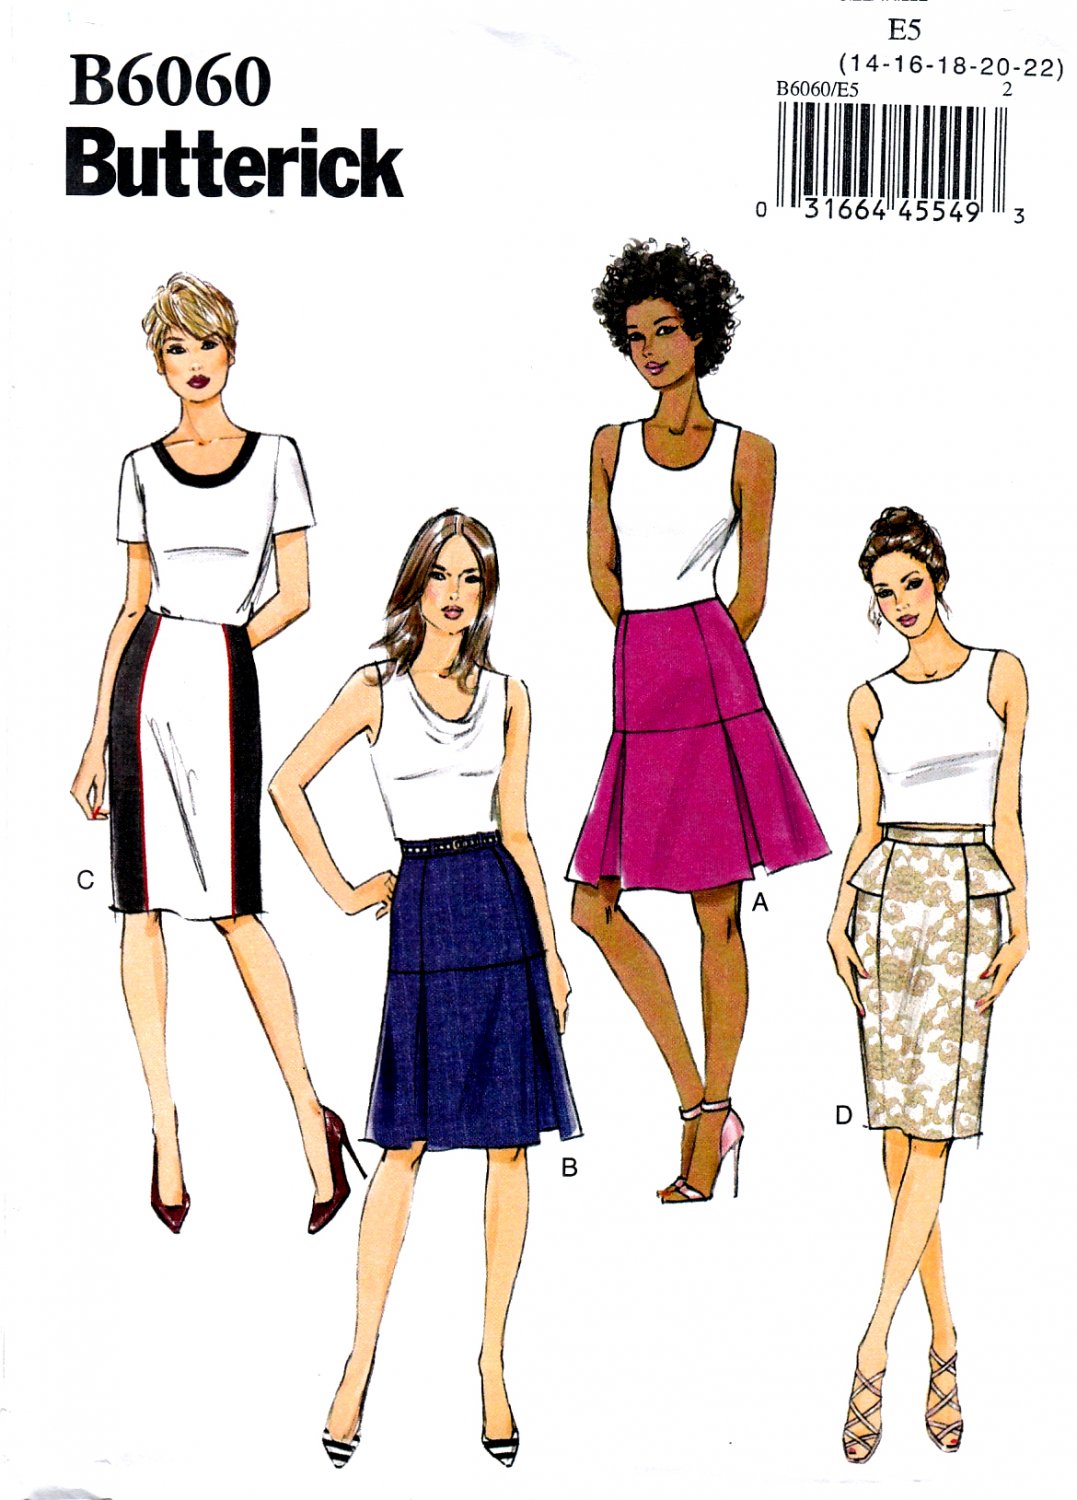 Butterick B6060 Misses Skirts Lined Semi Fitted Sewing Pattern Sizes 14-16-18-20-22-14